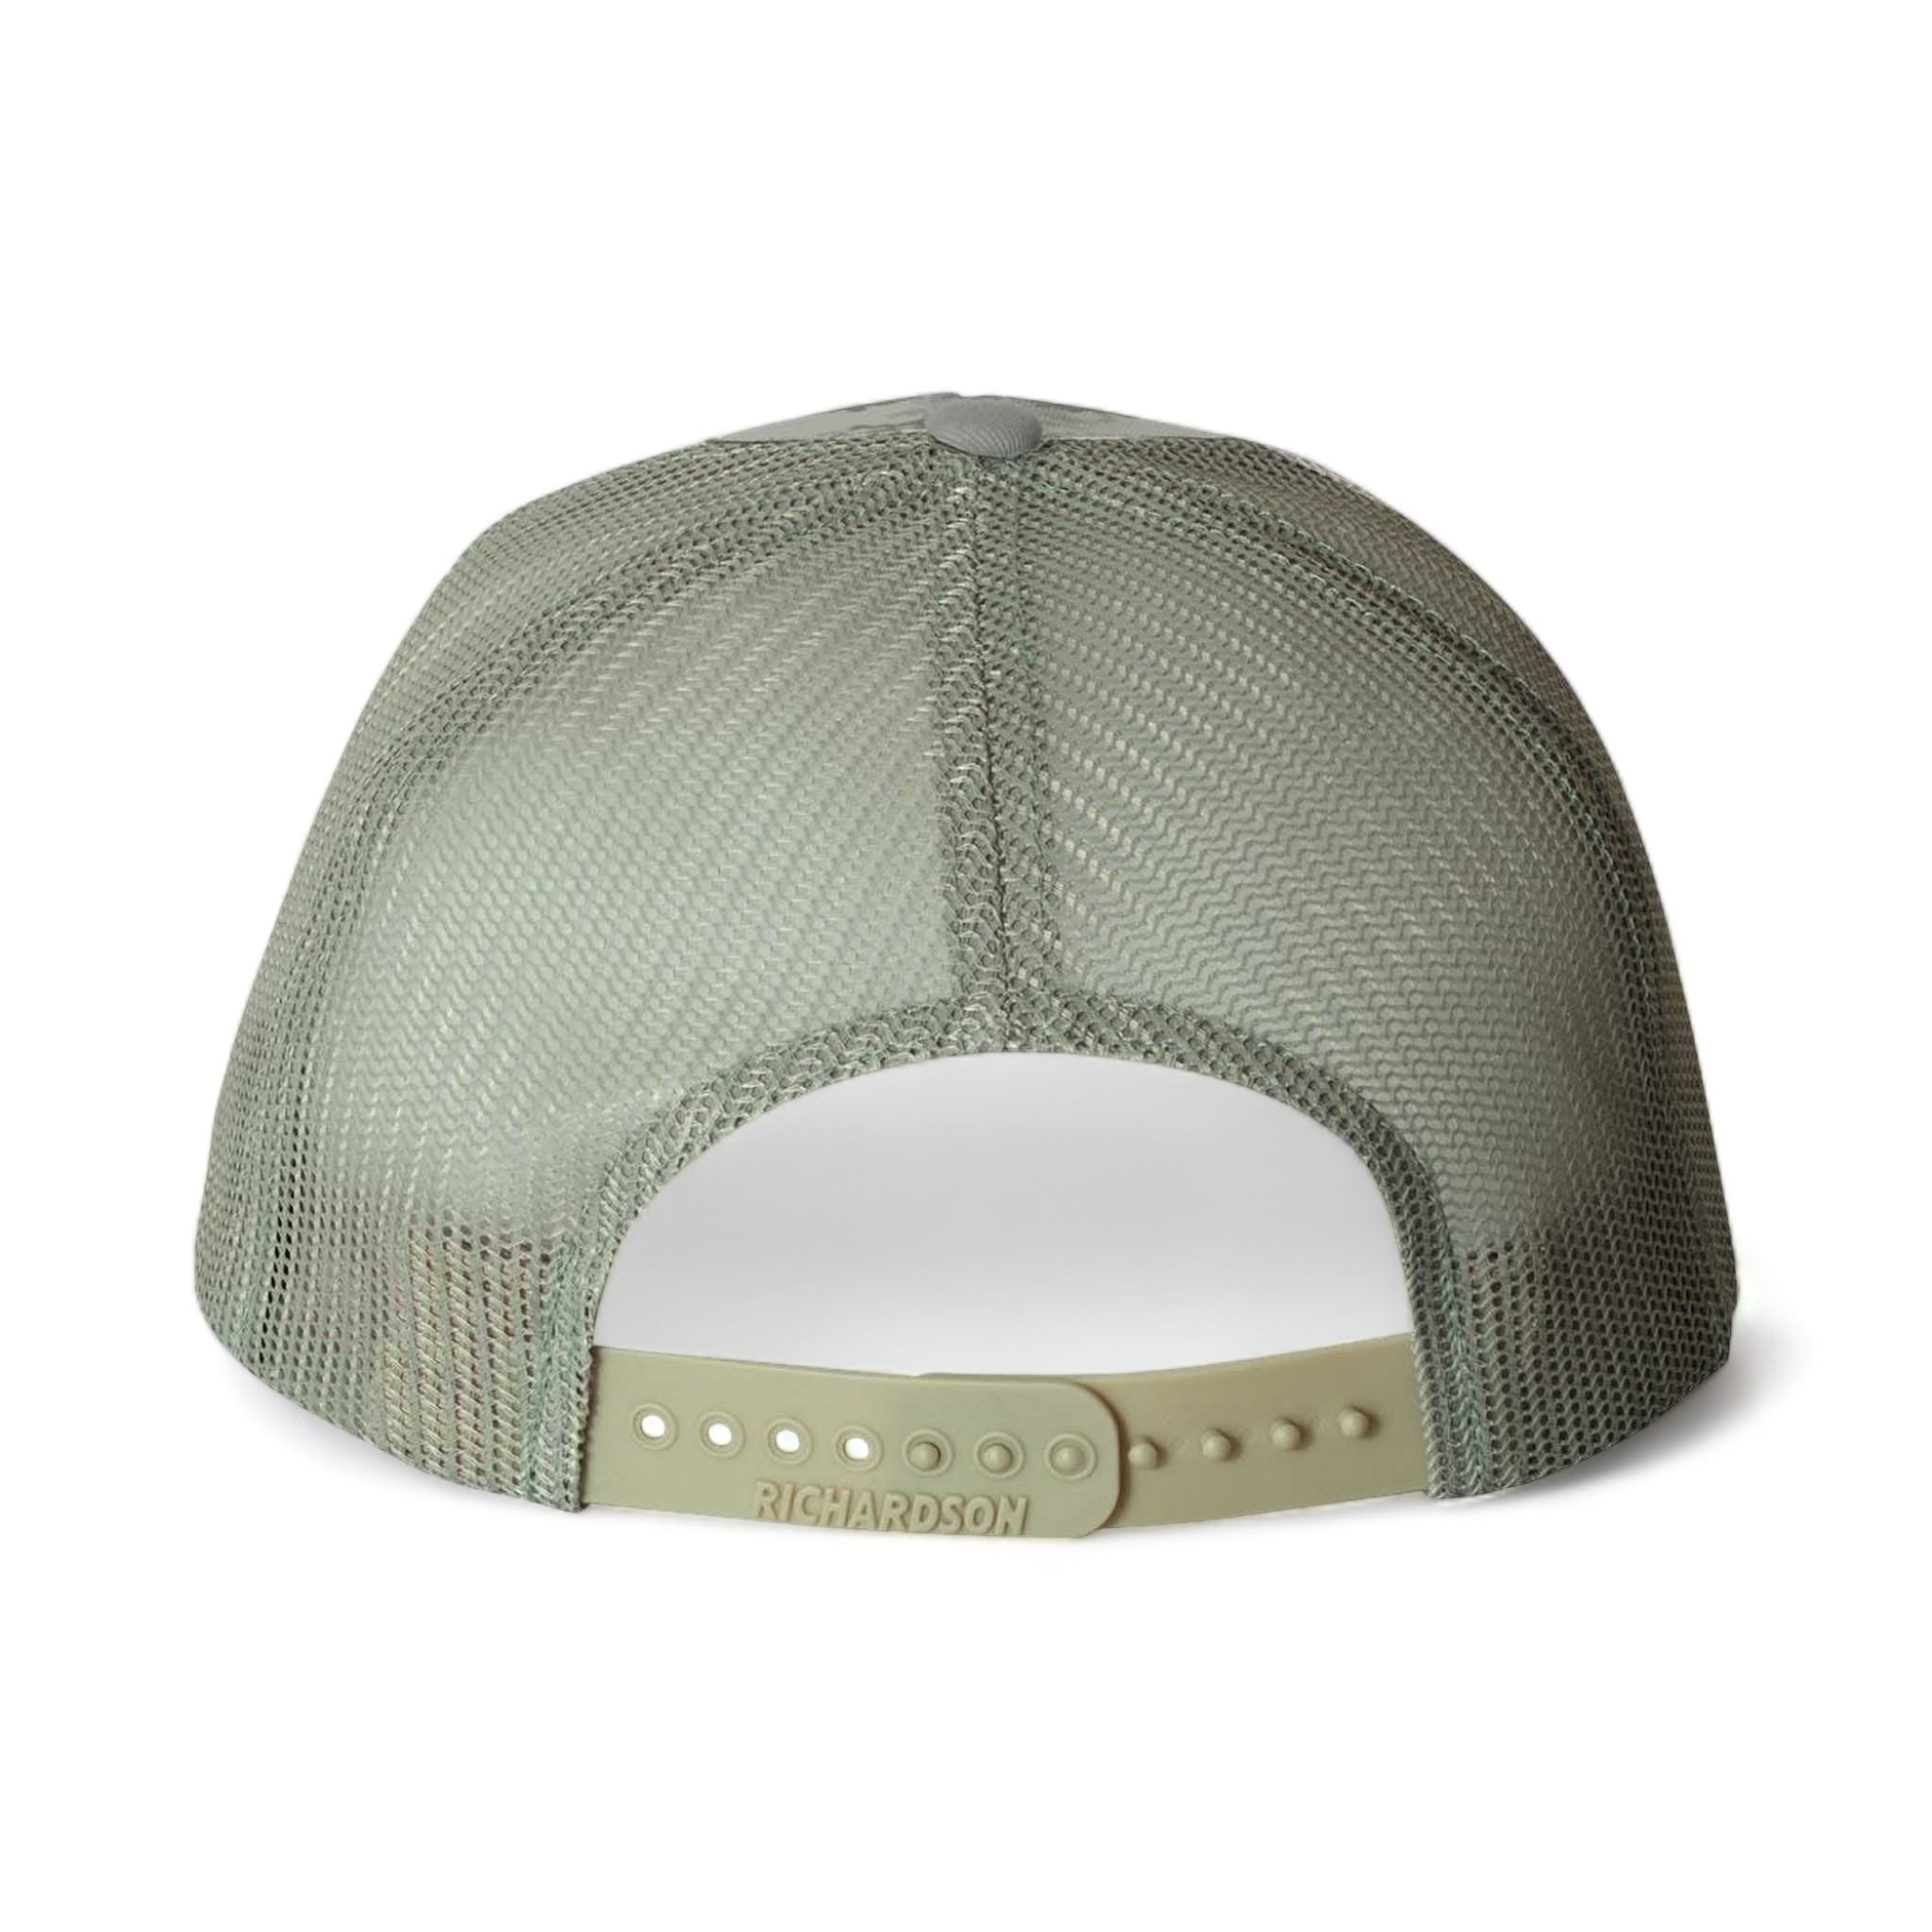 Back view of Richardson 112P custom hat in military digital camo and light green